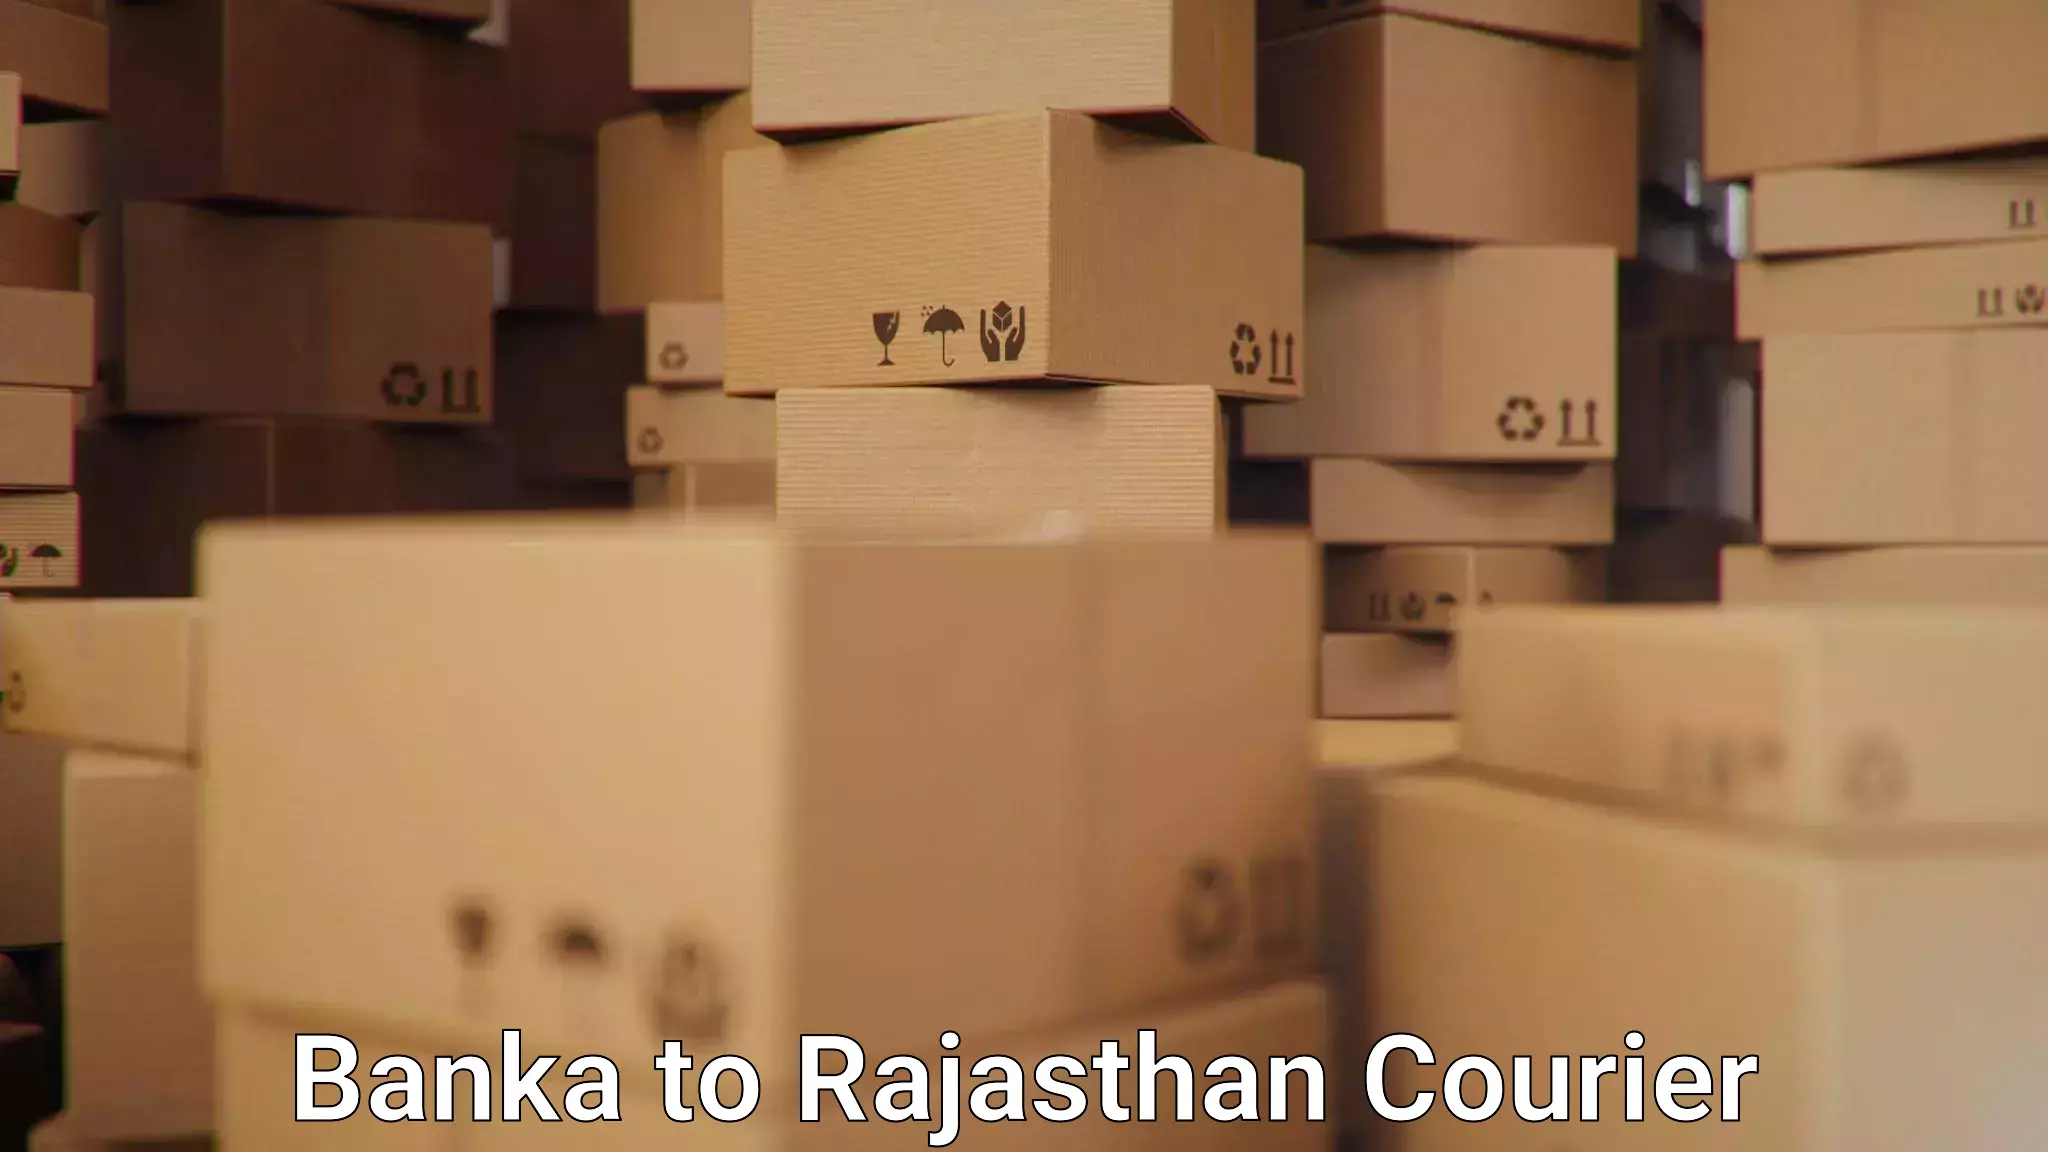 Flexible delivery schedules Banka to Rajasthan